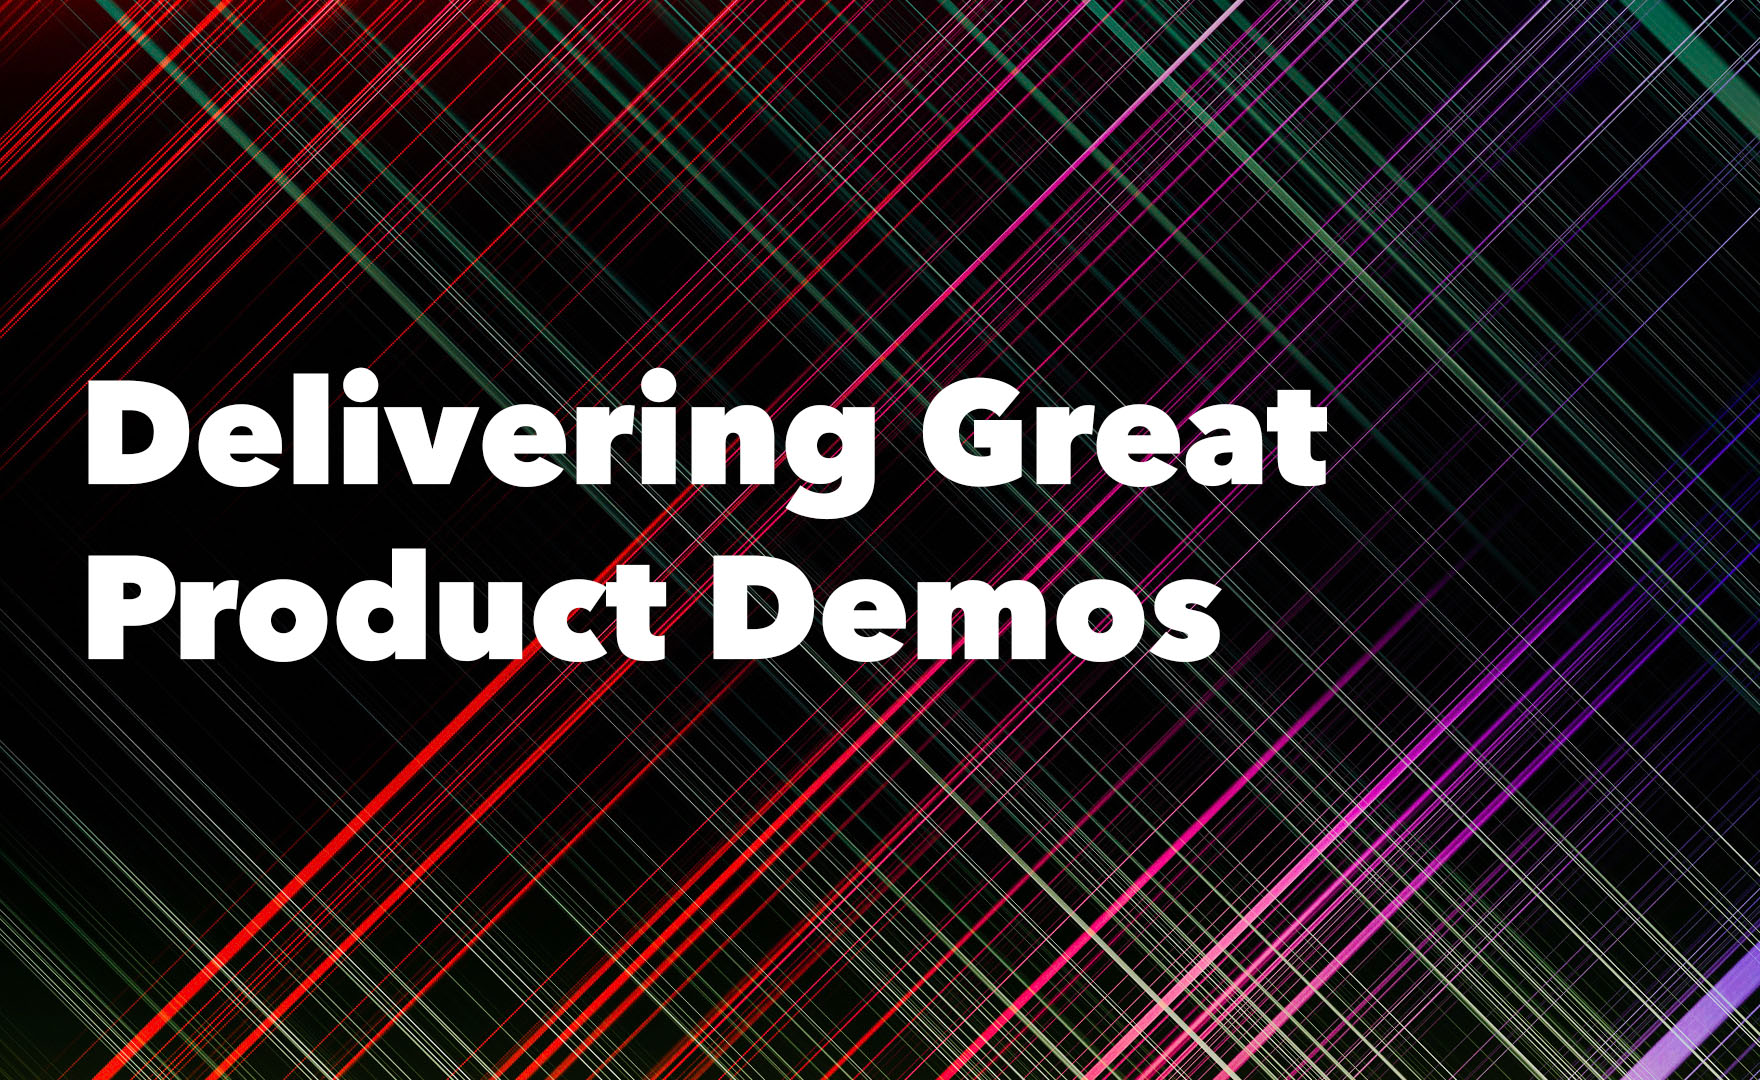 Advice for Delivering Great Product Demos